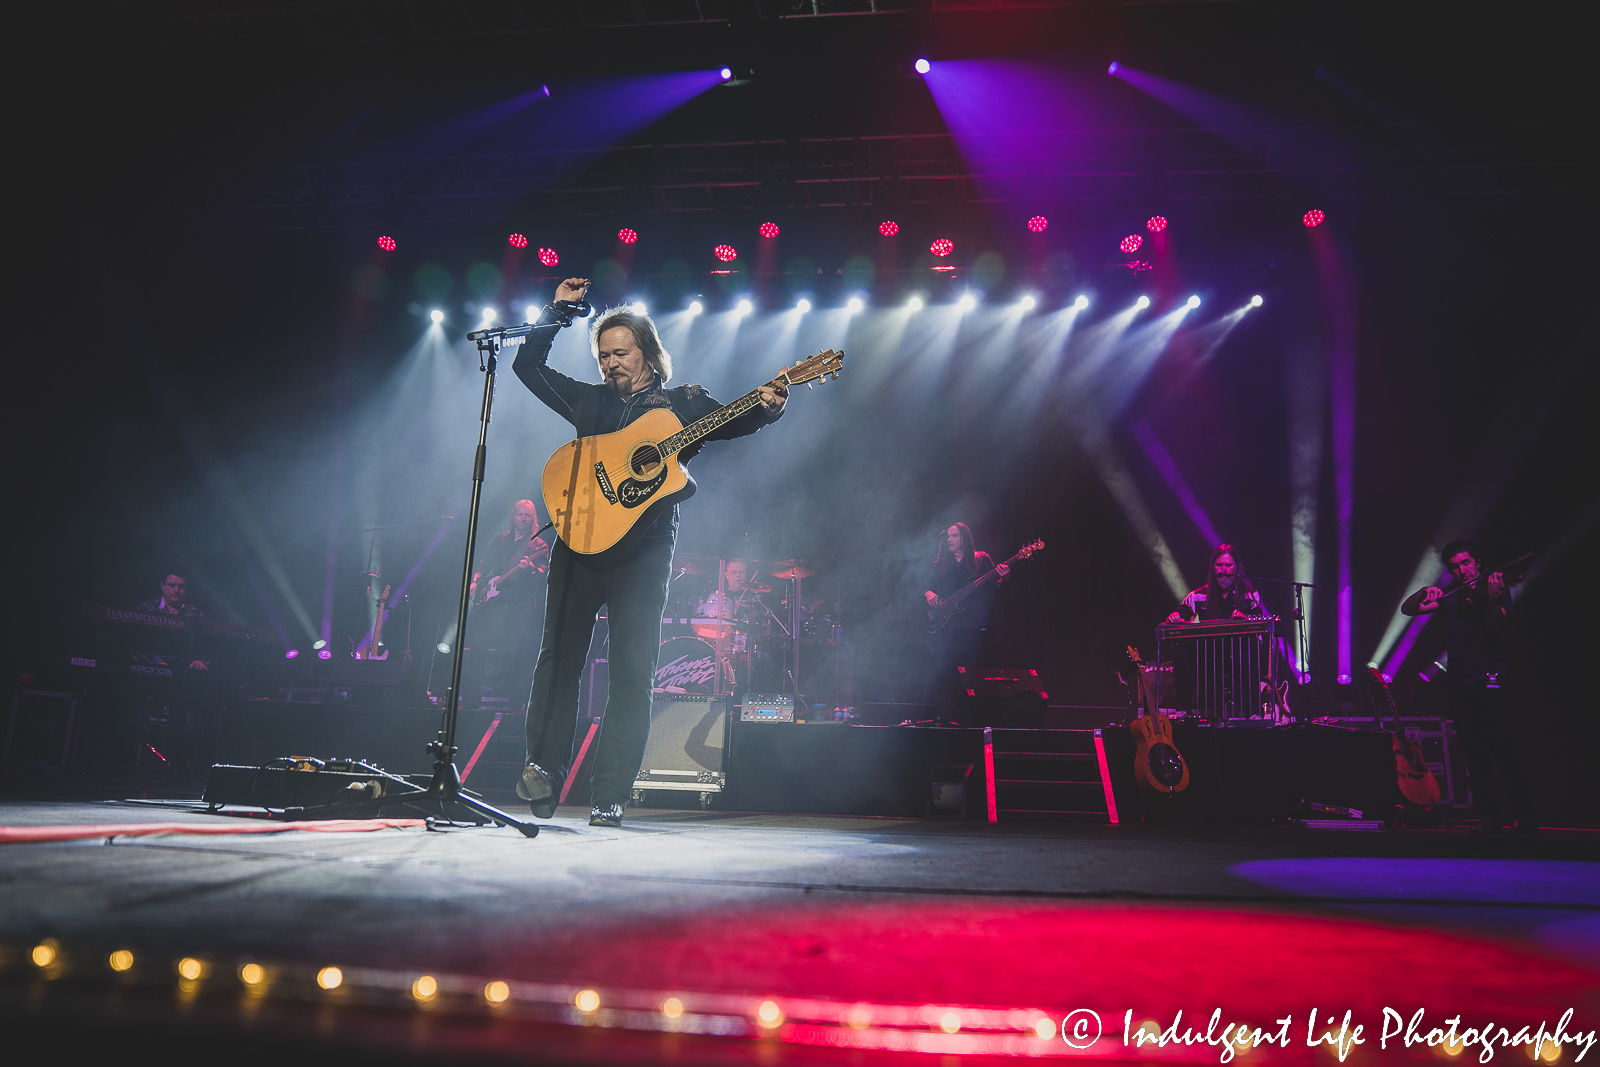 Travis Tritt and his band performing "I'm Gonna Be Somebody" live at Star Pavilion inside of Ameristar Casino in Kansas City, MO on December 10, 2022.